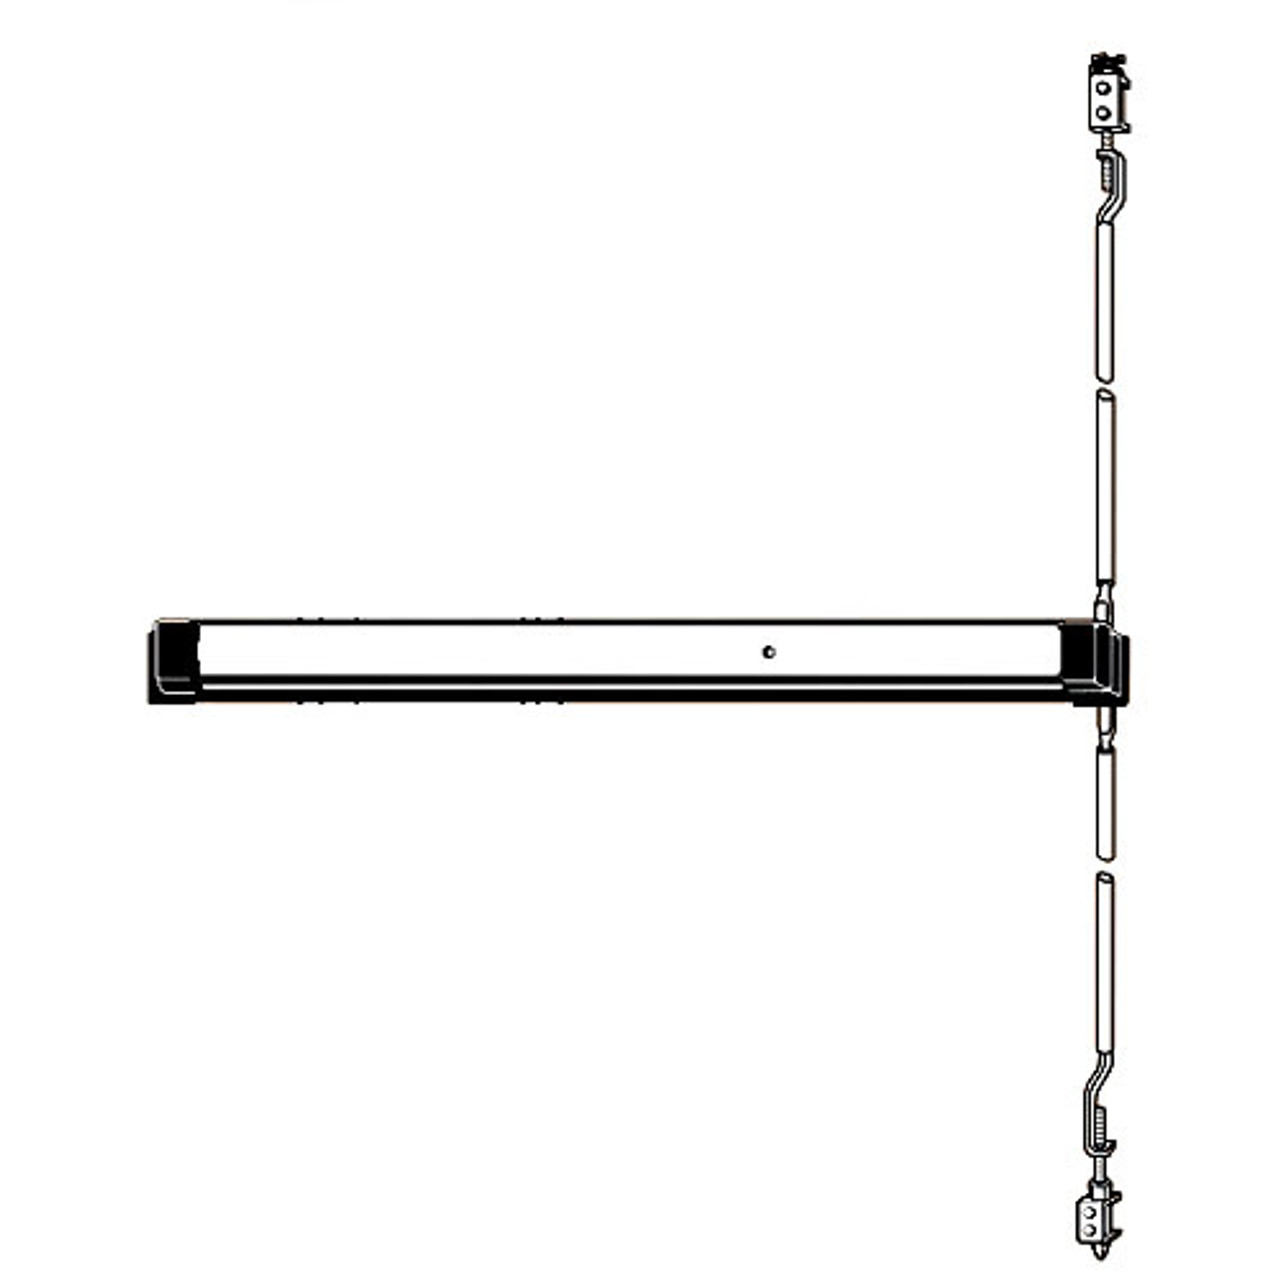 Adams Rite Narrow Stile Concealed Vertical Rod Exit Device